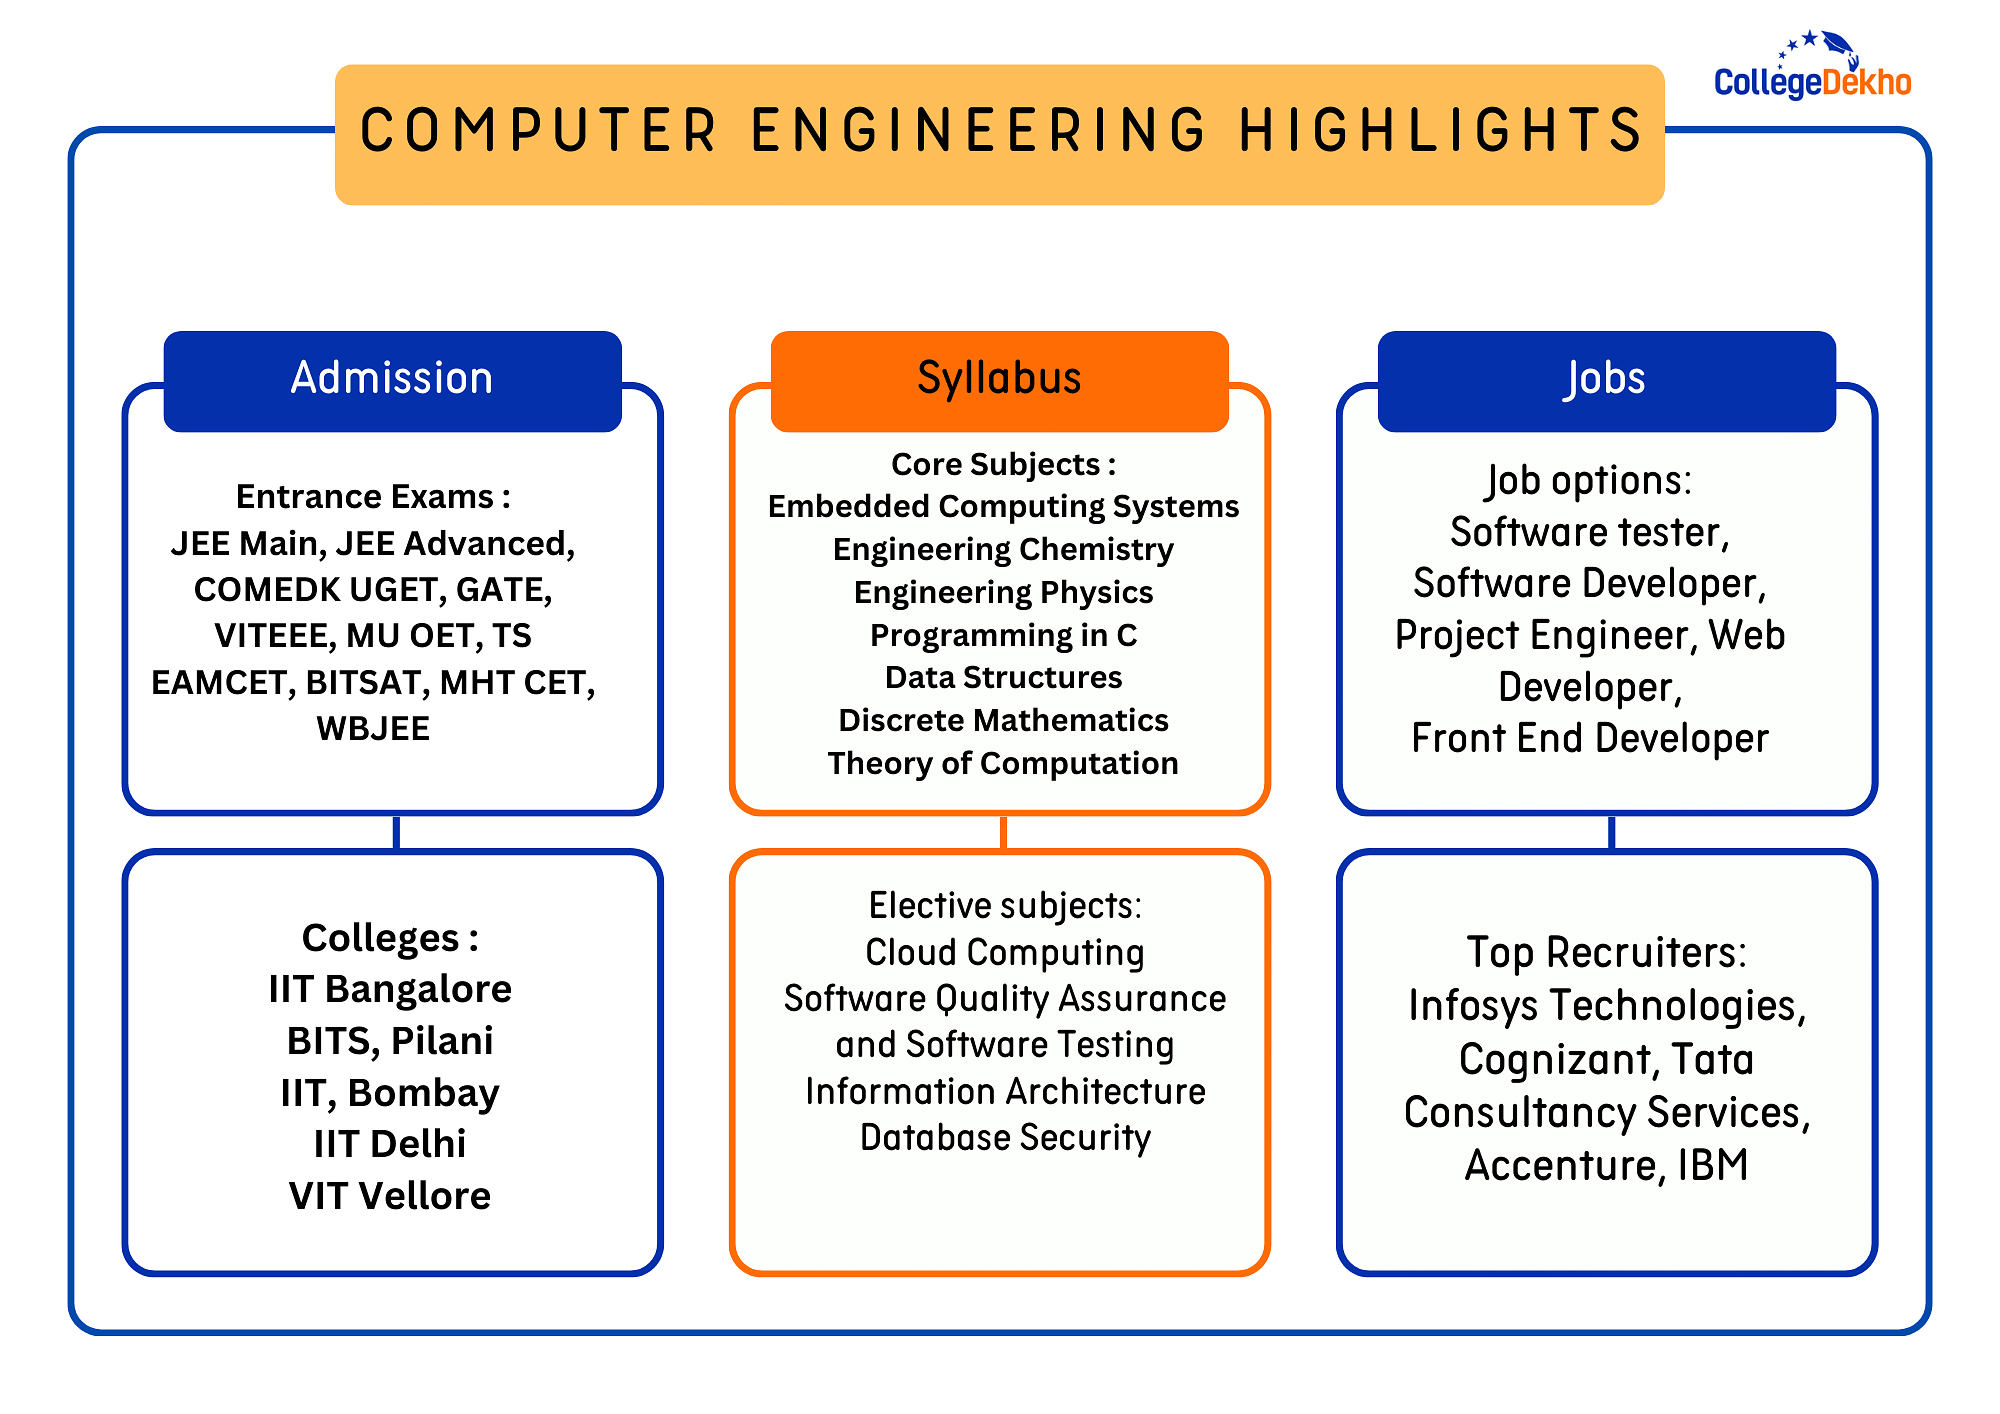 Computer Engineering Course Highlights